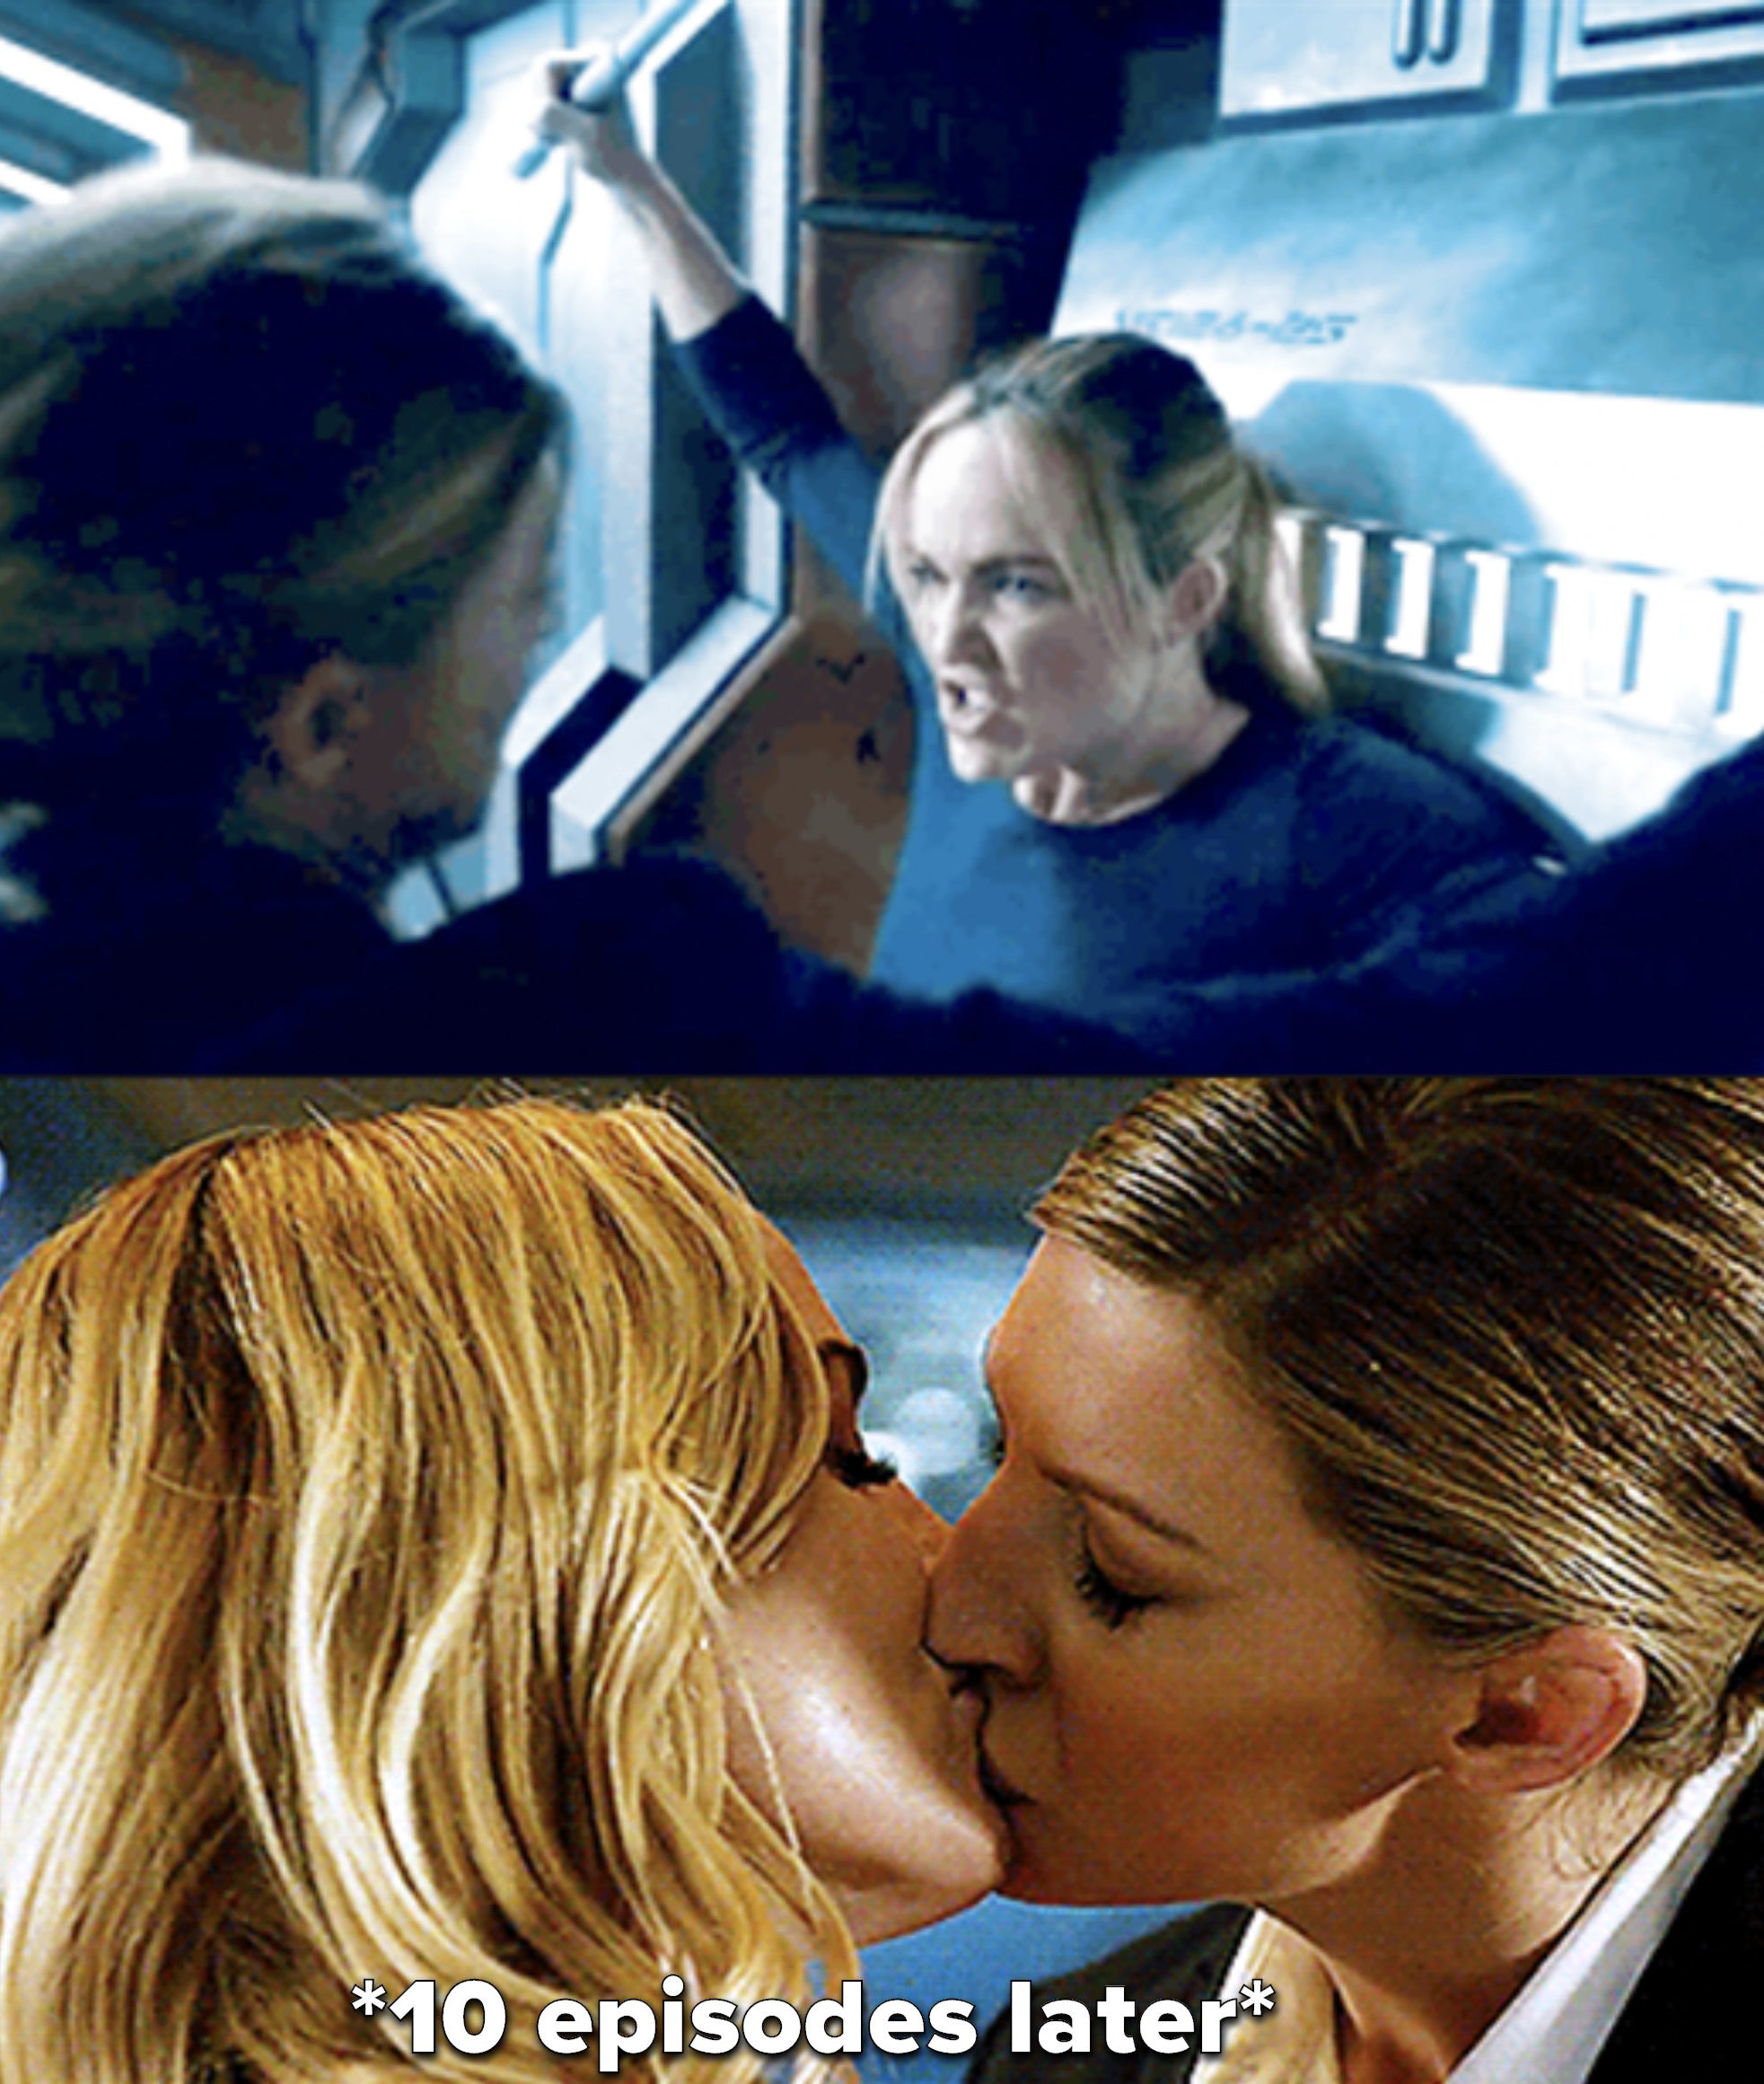 Sara and Ava fight, then ten episodes later they kiss